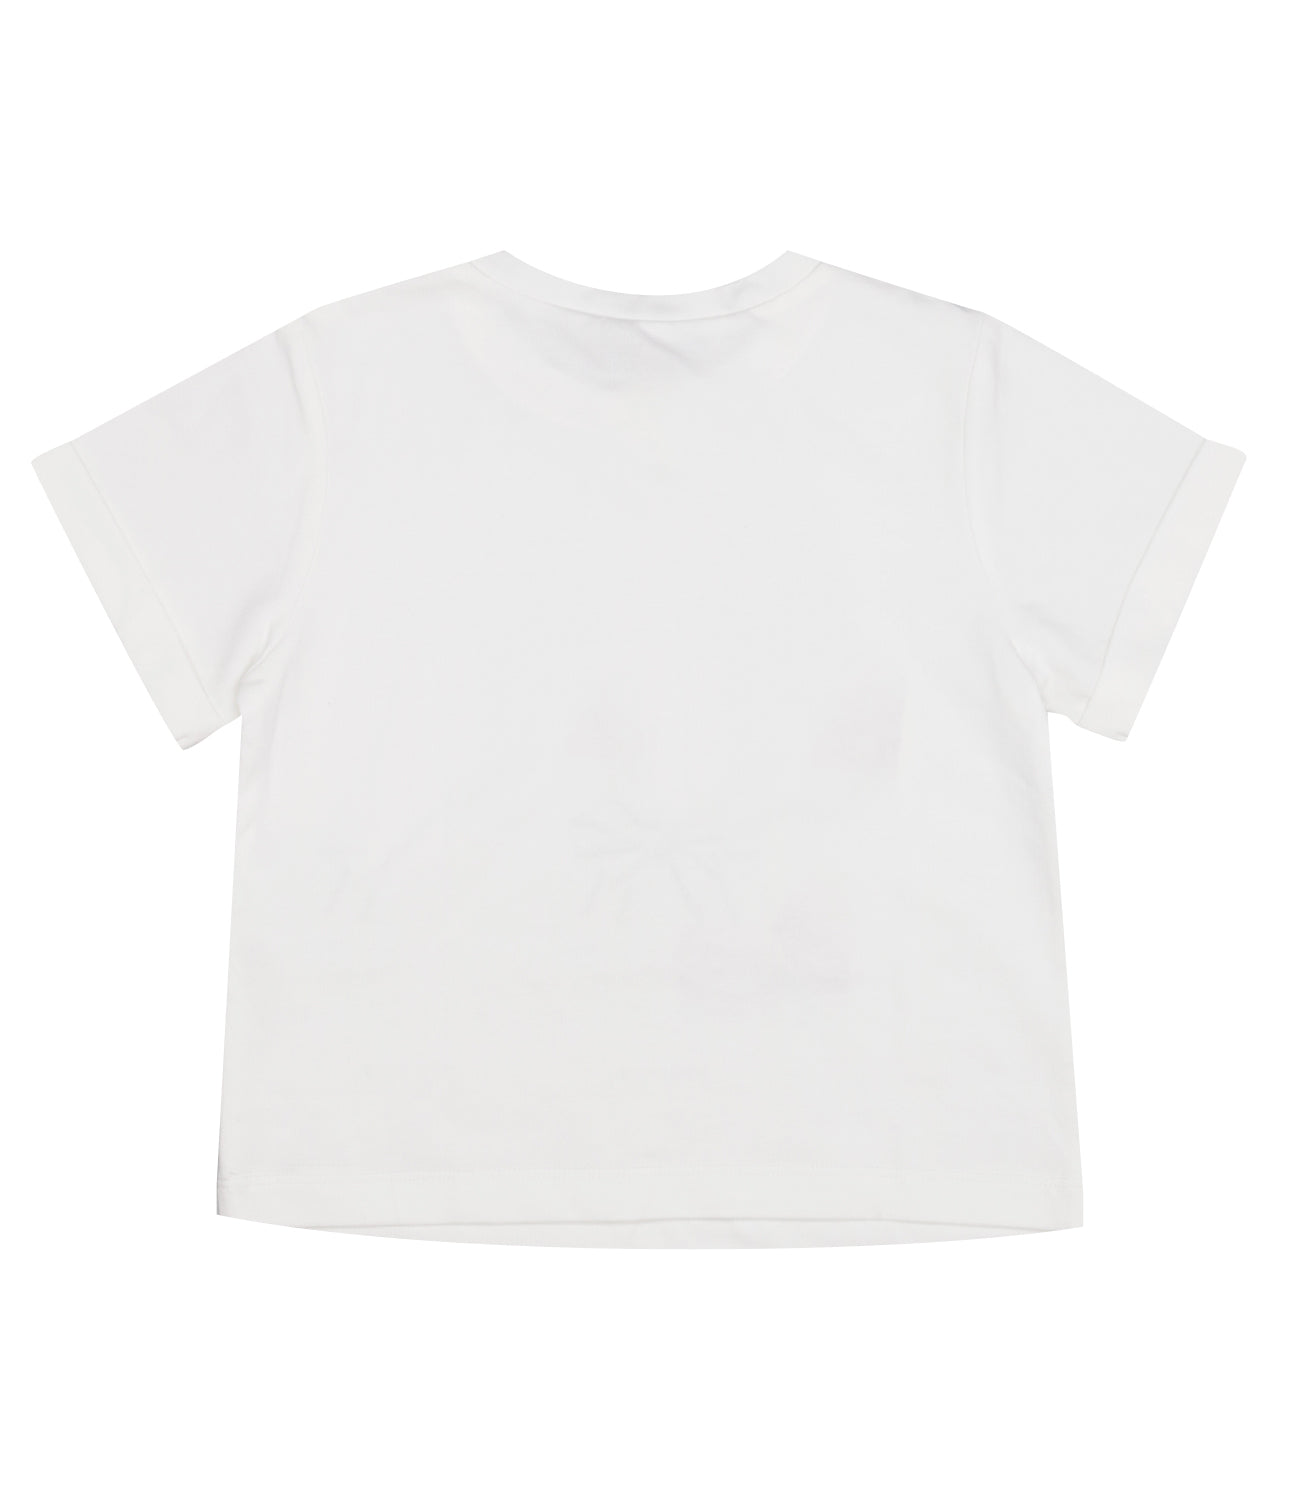 Twinset Kids | T-Shirt St Cup Of Tea White